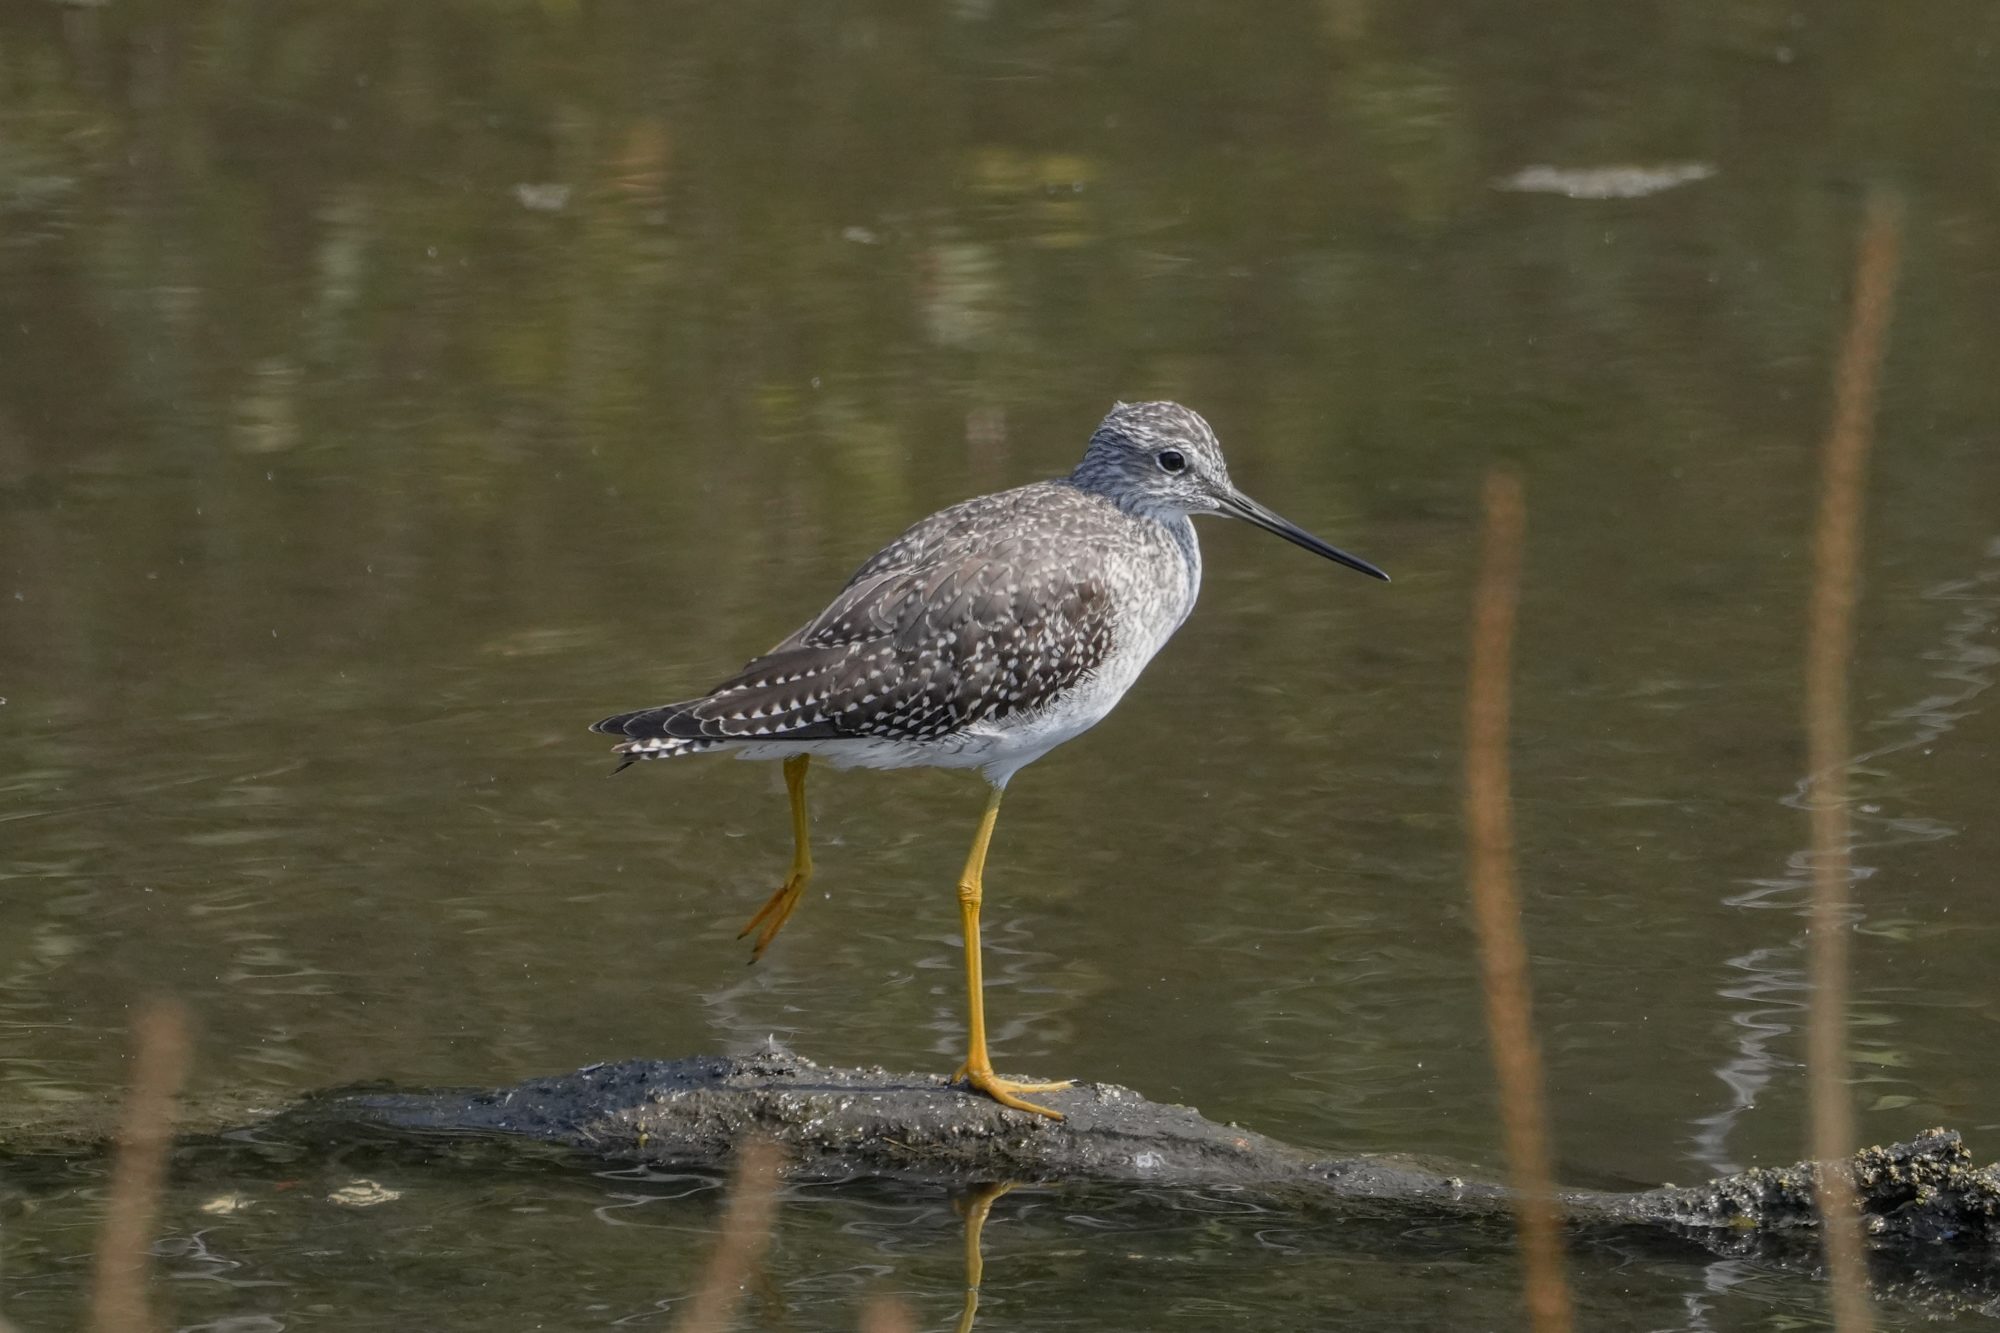 A Greater Yellowlegs standing by itself on a little log, on one leg